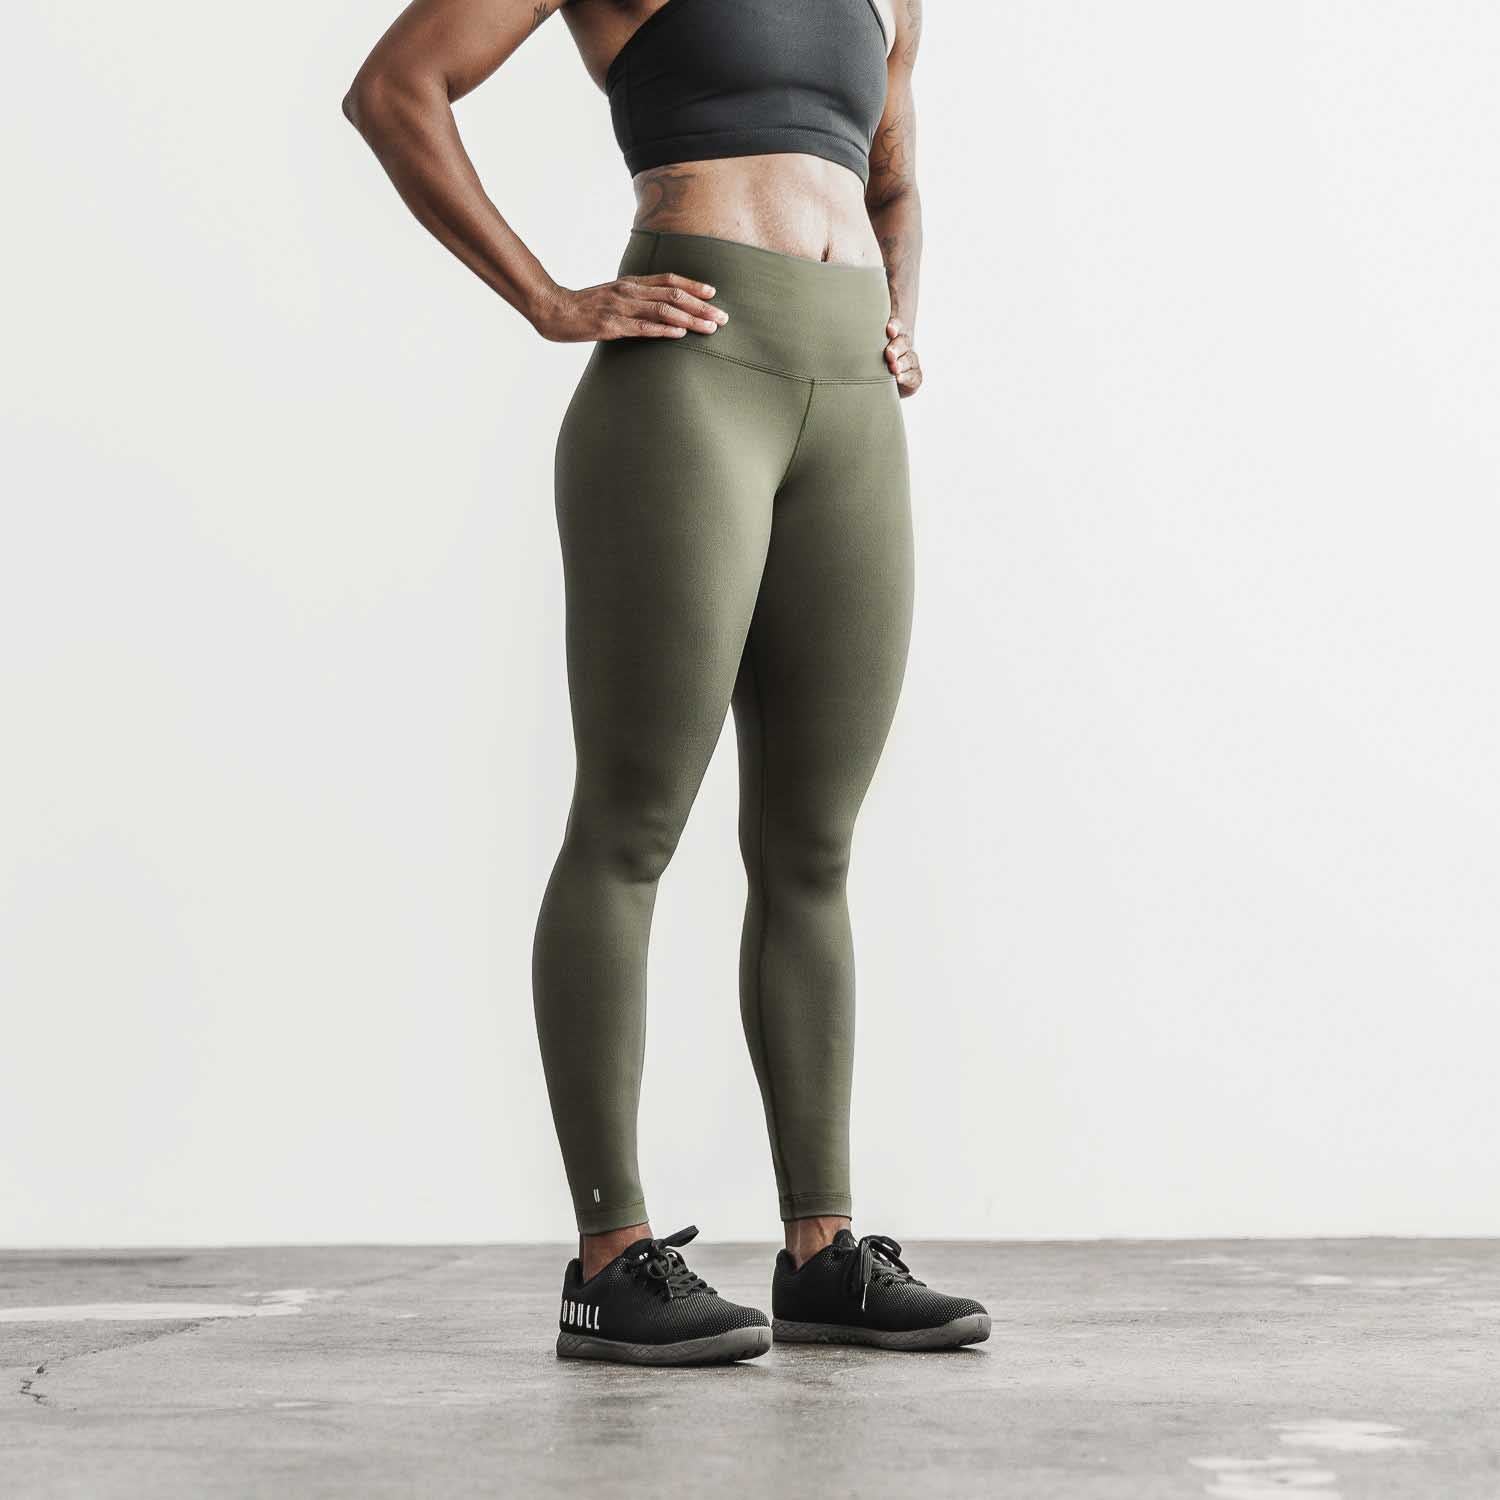 Women's High Waist Workout Yoga Pants Athletic Legging - Army Green / S